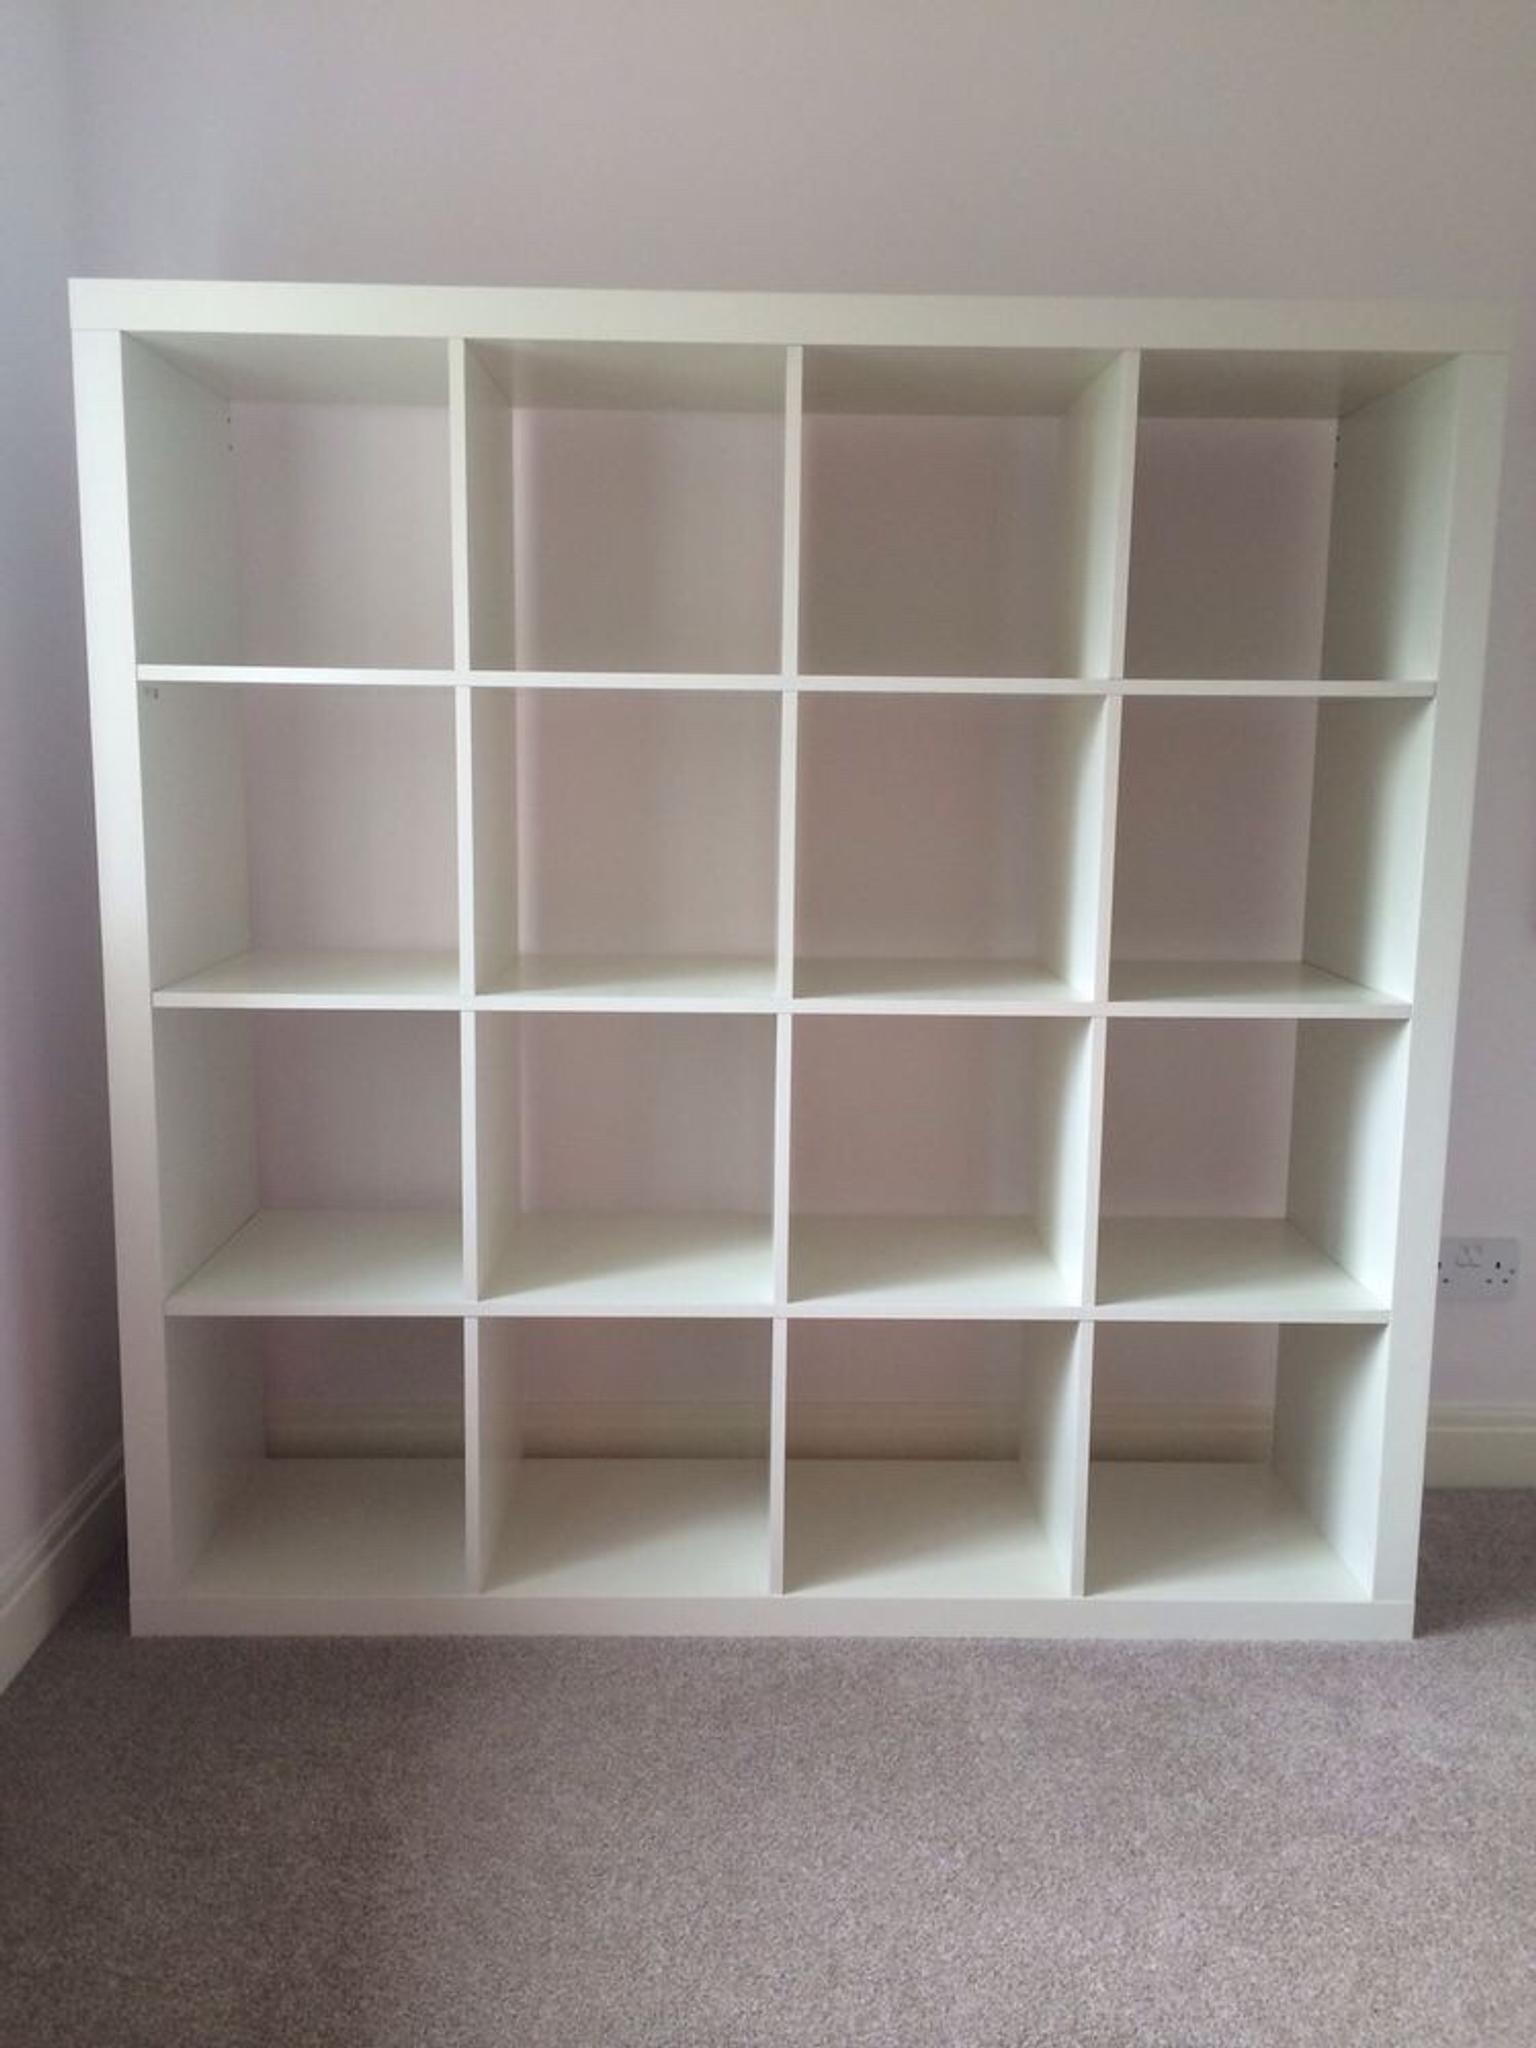 Ikea Expedit 4x4 Shelf In N1 Islington For 50 00 For Sale Shpock